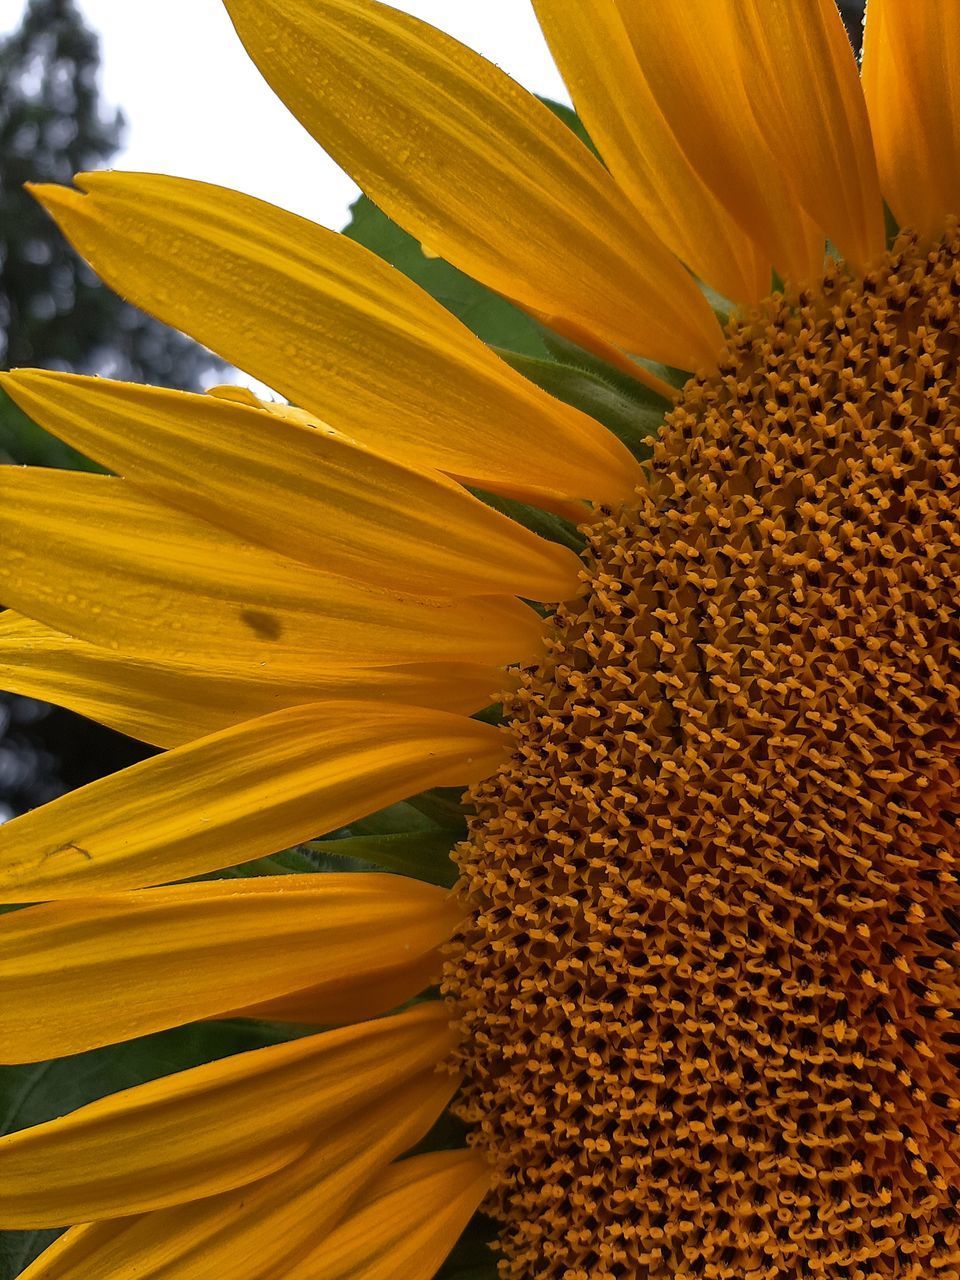 CLOSE-UP OF SUNFLOWER AGAINST CLEAR BLUE SKY